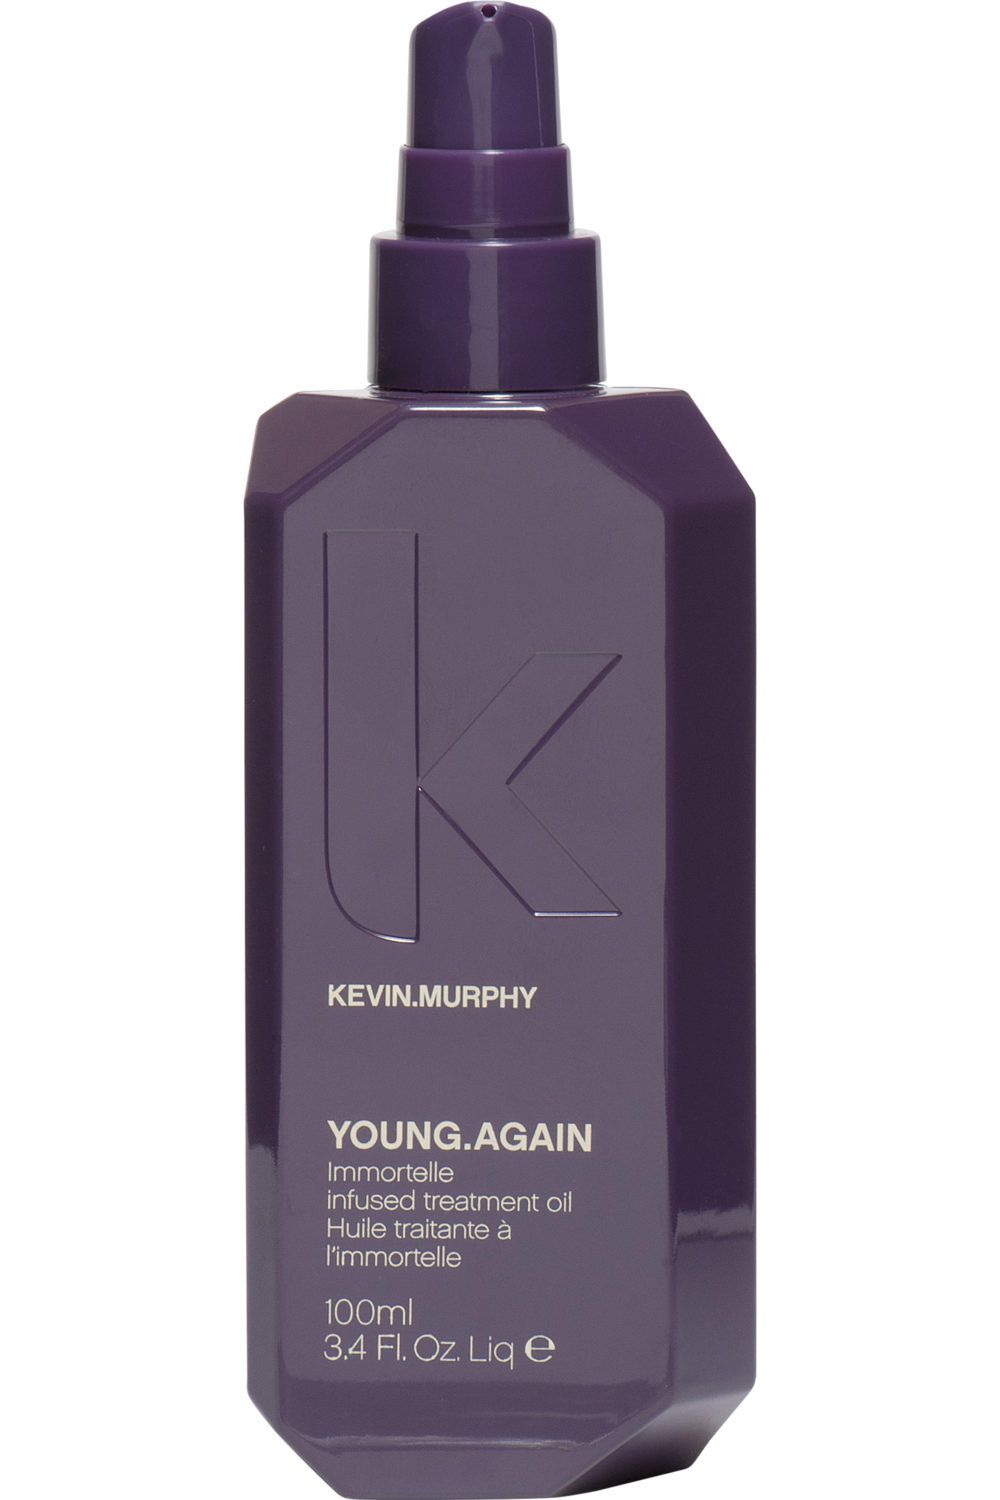 KEVIN.MURPHY - Young Again Serum